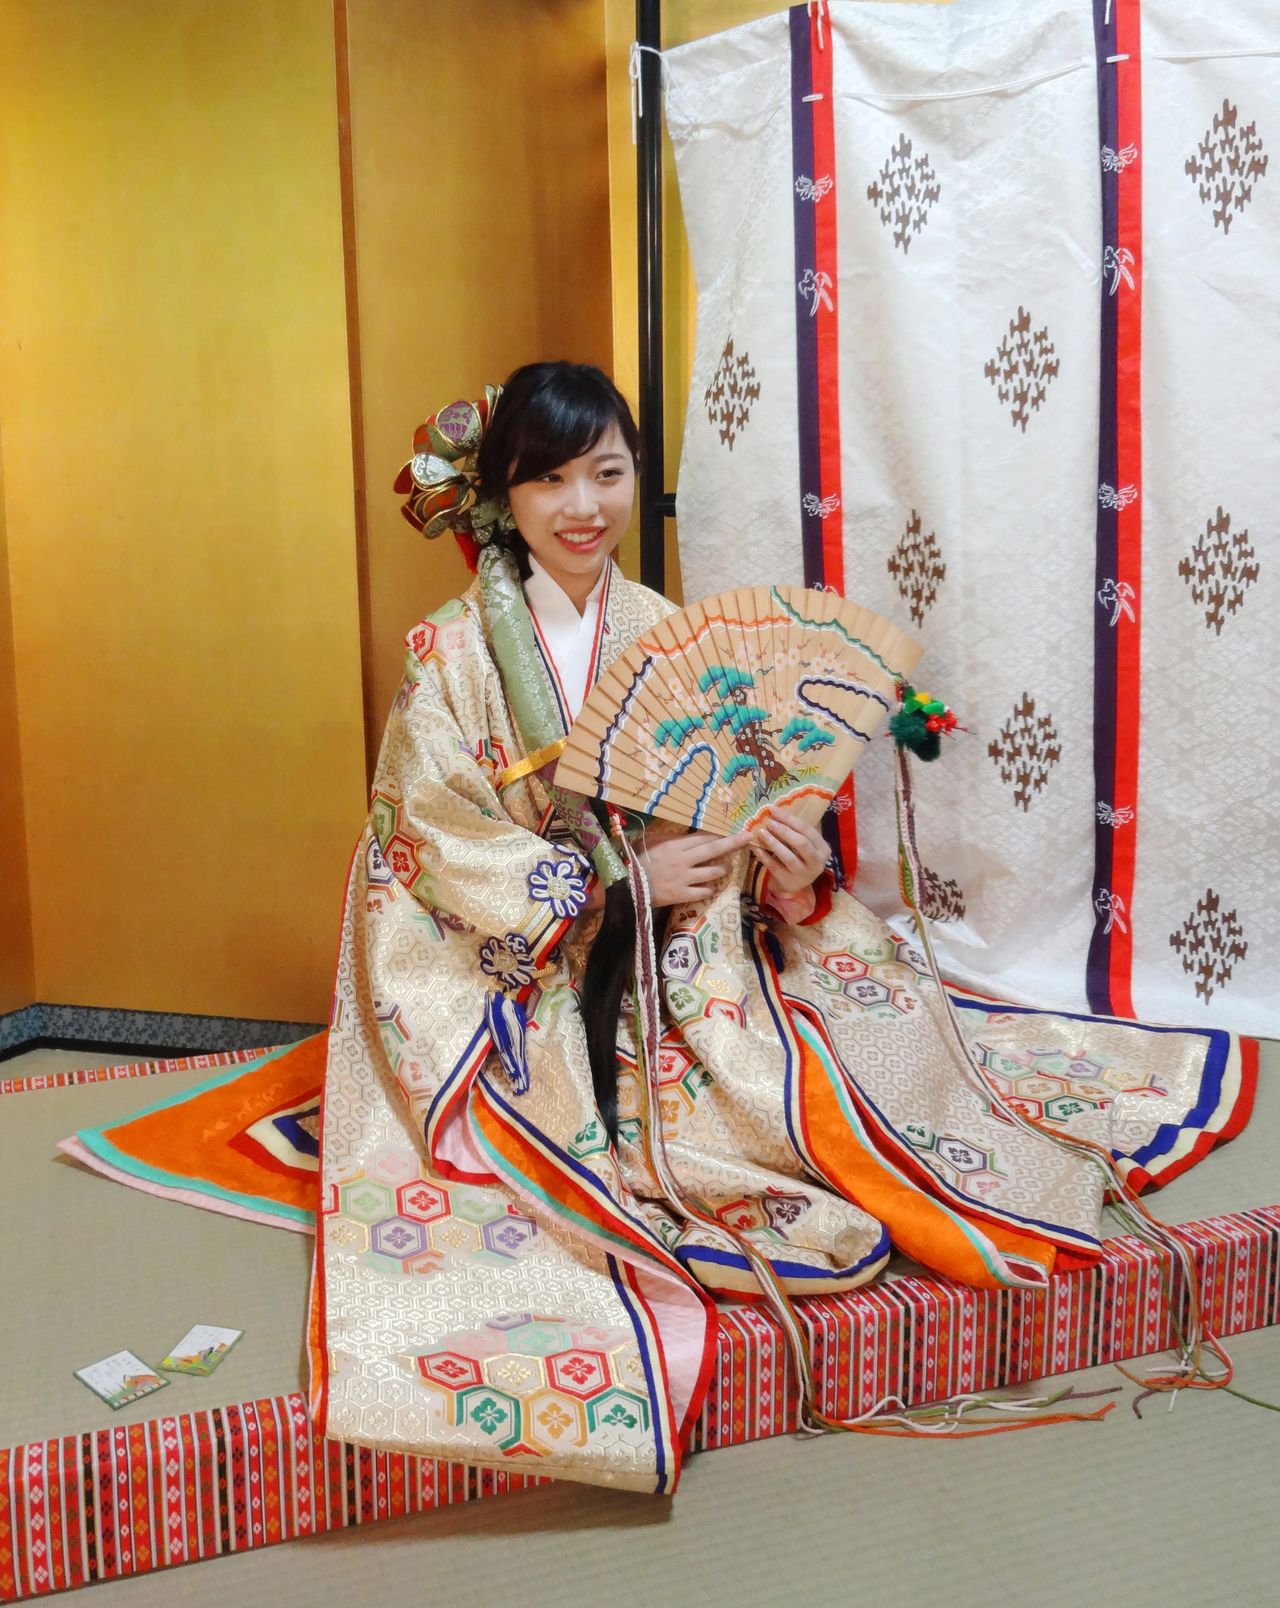 Ōmi-jingū offers visitors the chance to “become the karuta poets” with costumed photography sessions. (© Jiji)